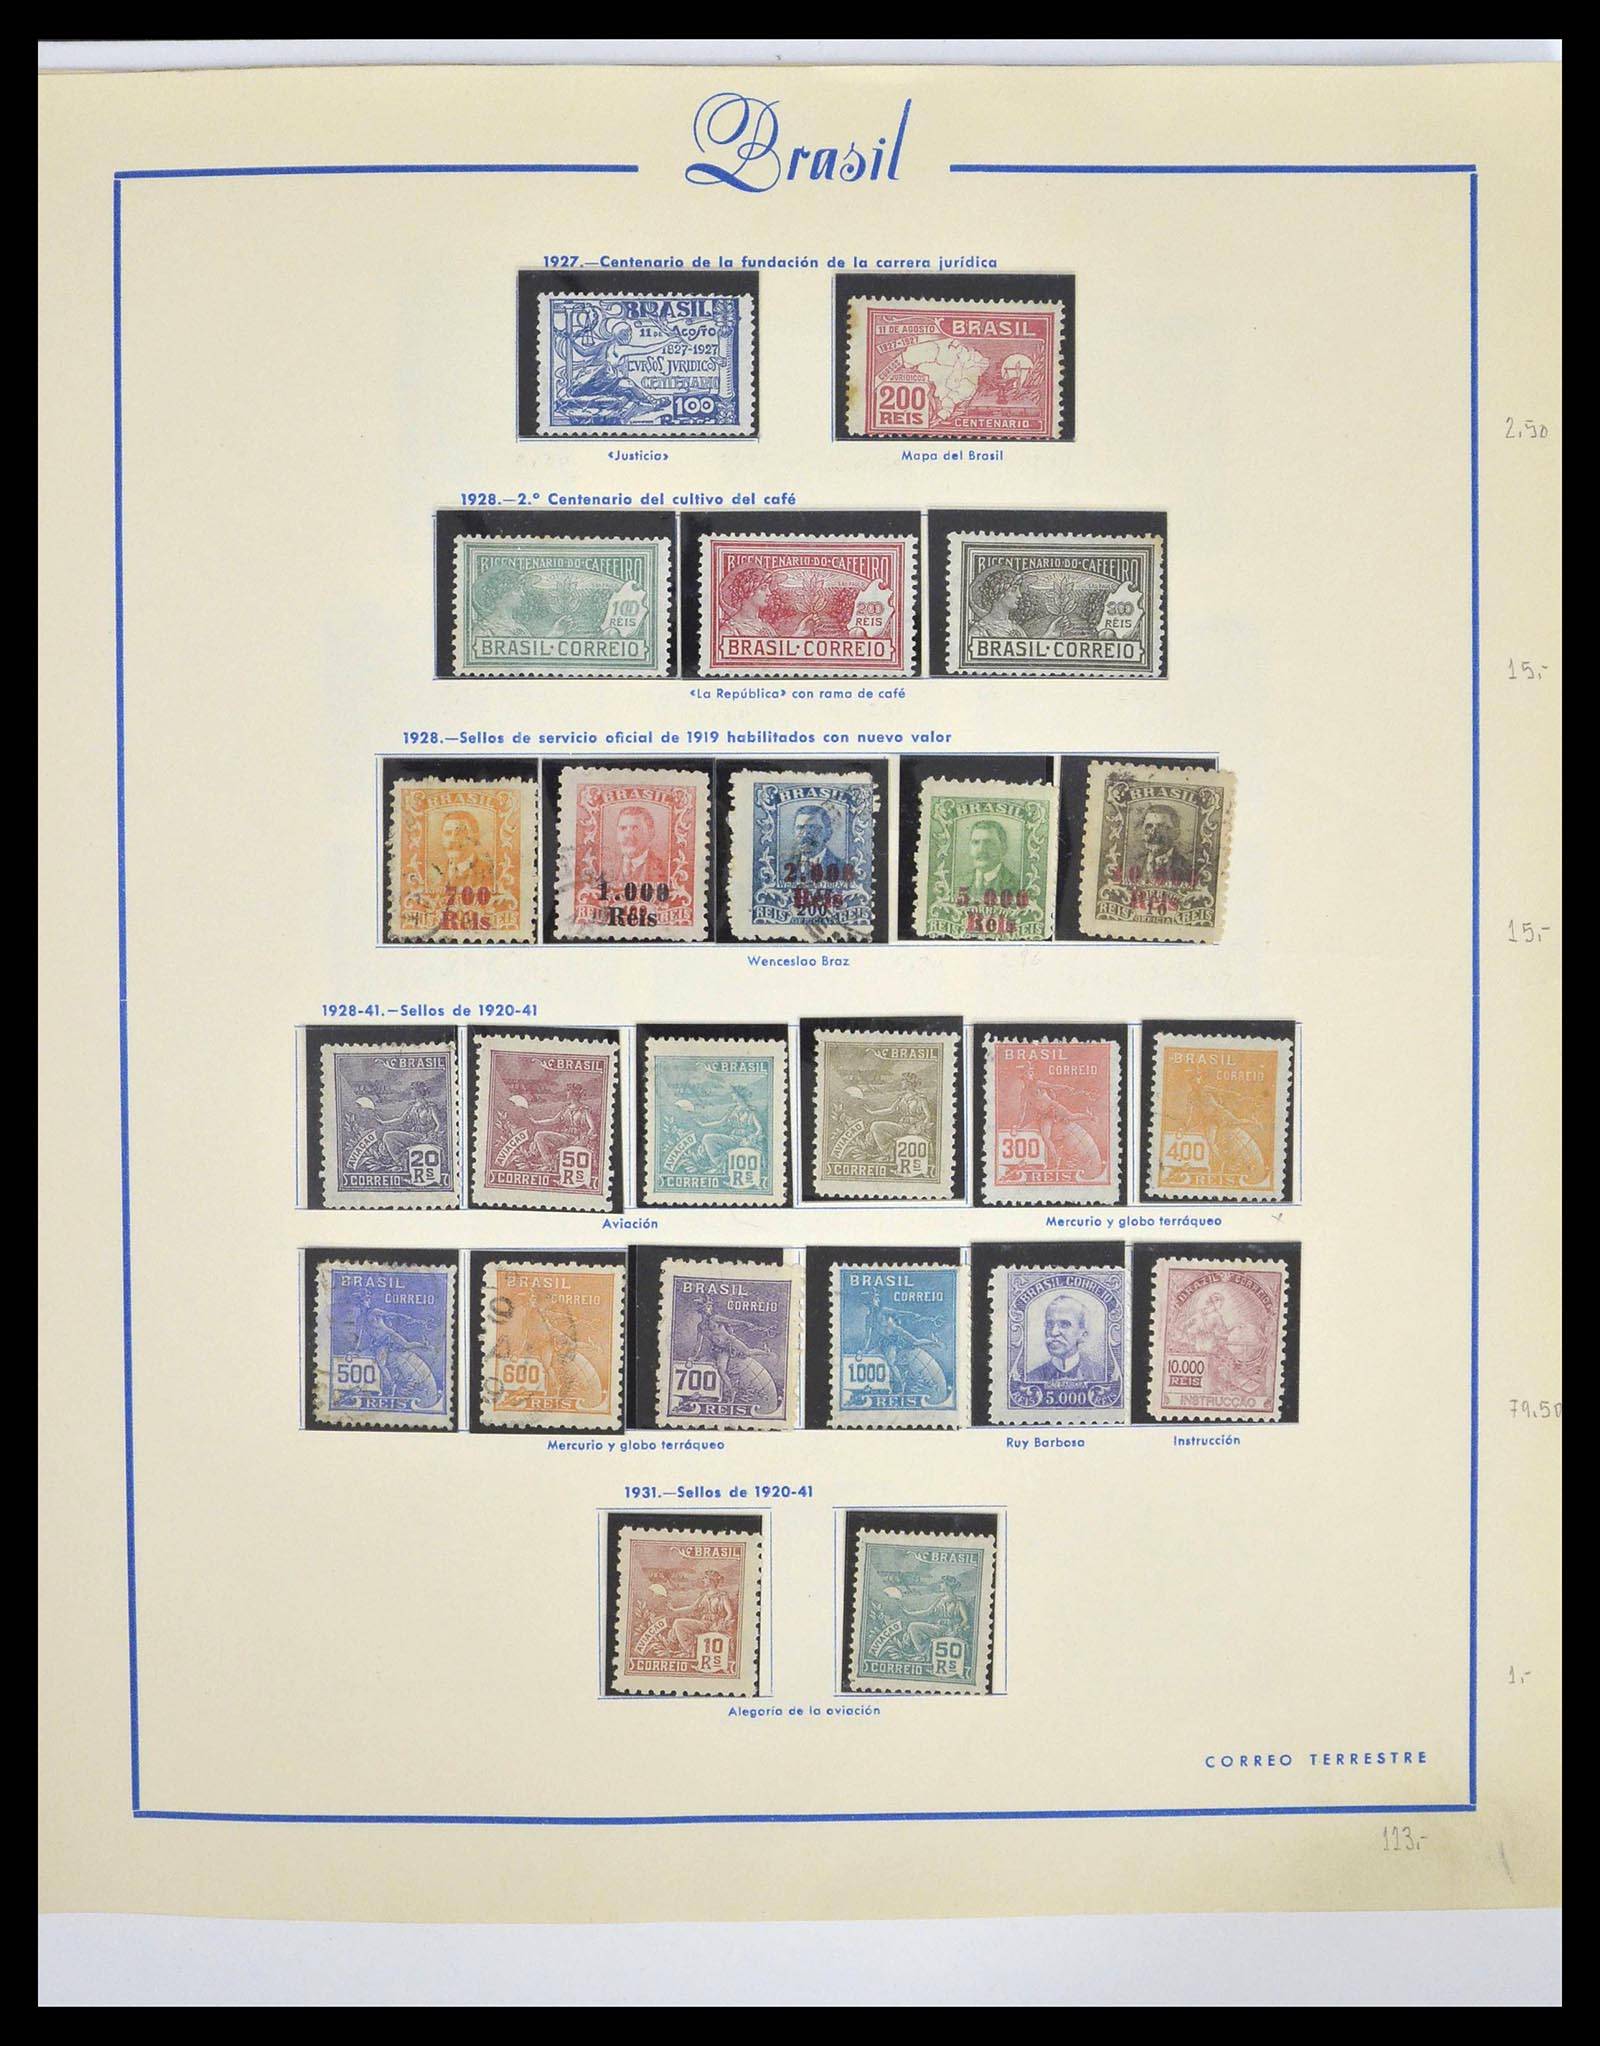 39245 0010 - Stamp collection 39245 Brazil 1843-1968.